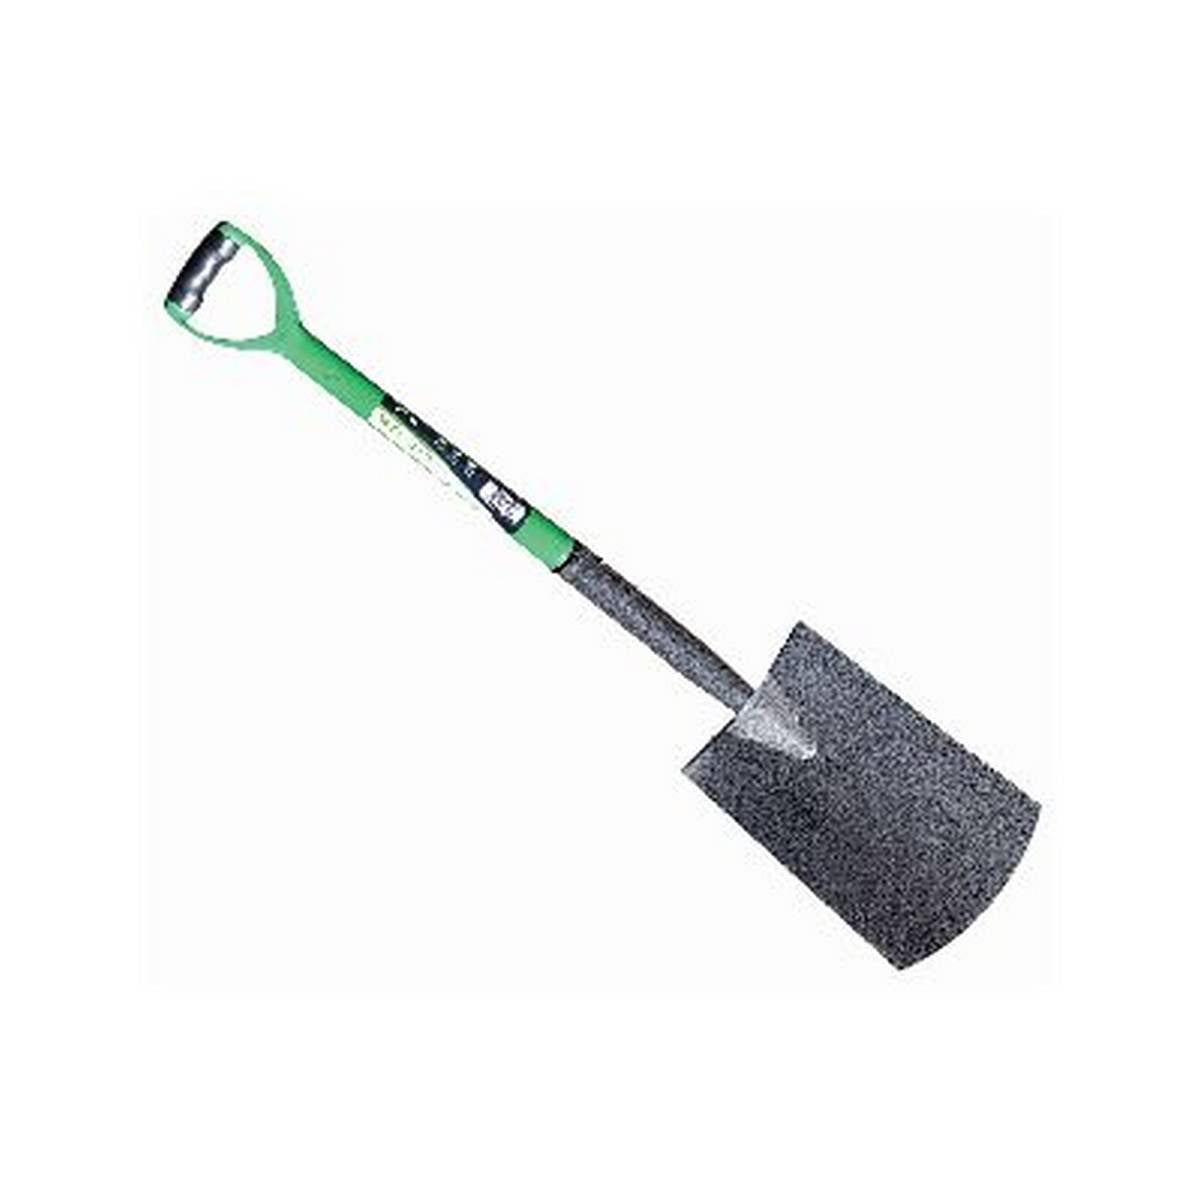 GREENBLADE GREEN BLADE DIGGING SPADE WITH PLASTIC COATED STEEL SHAFT BB-GS100